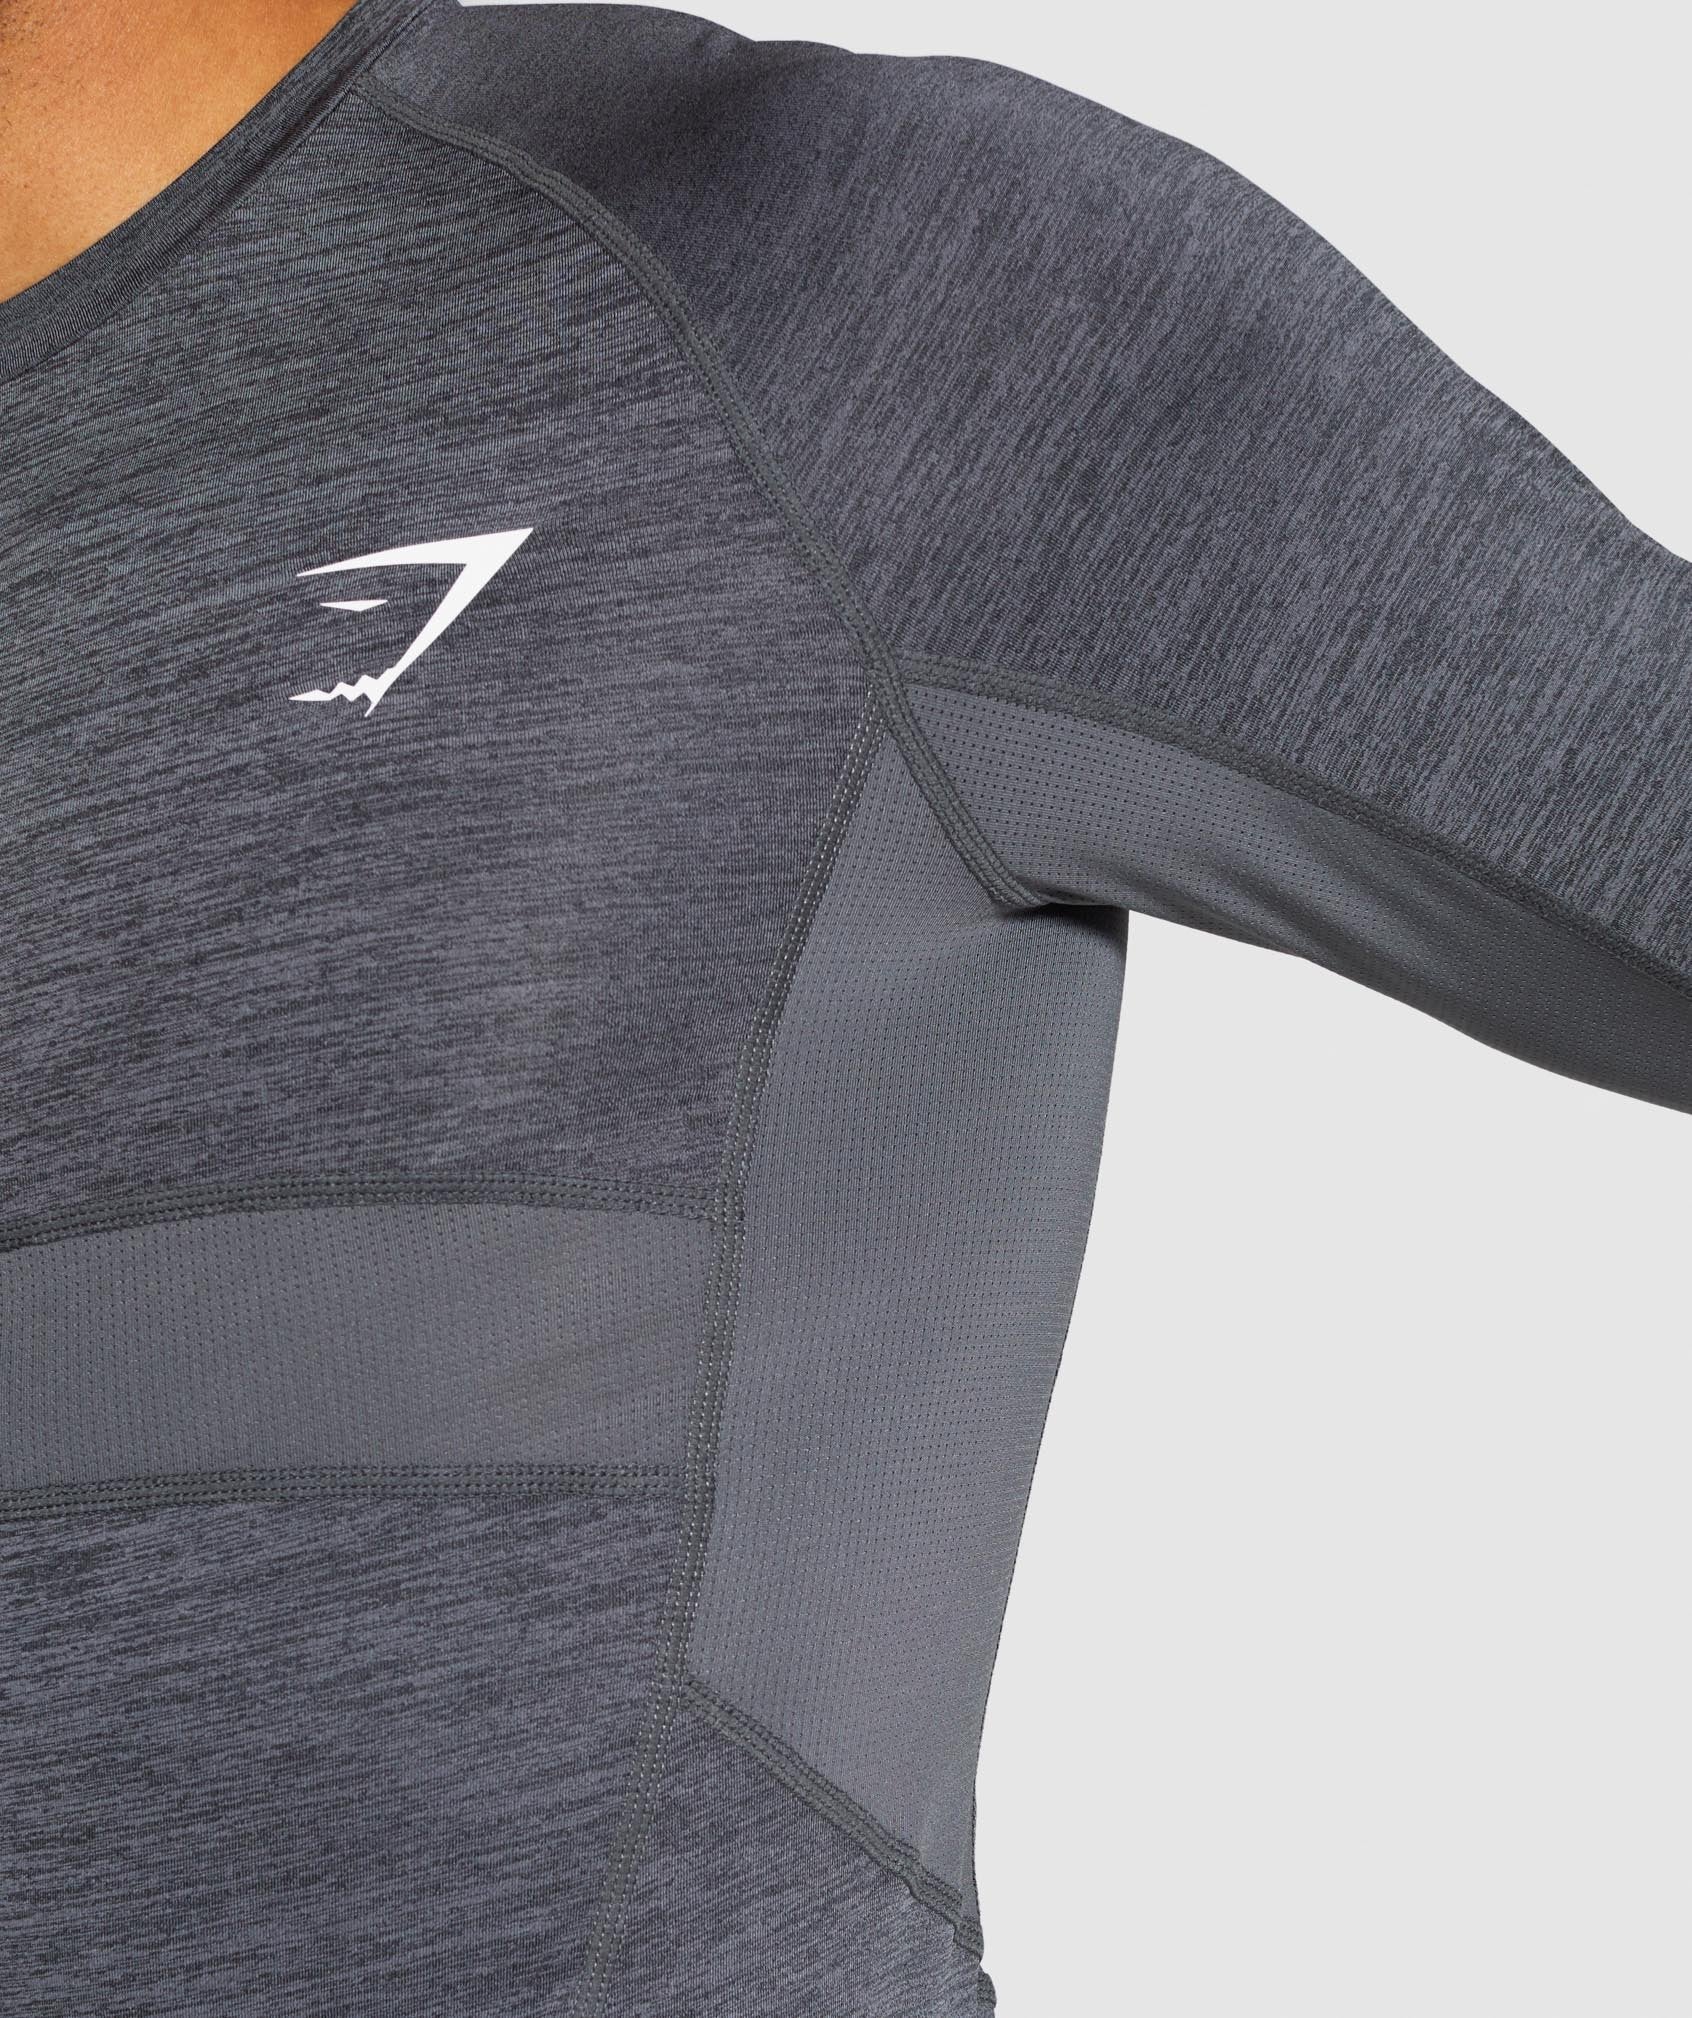 Element+ Baselayer Long Sleeve Top in Black Marl/White - view 5